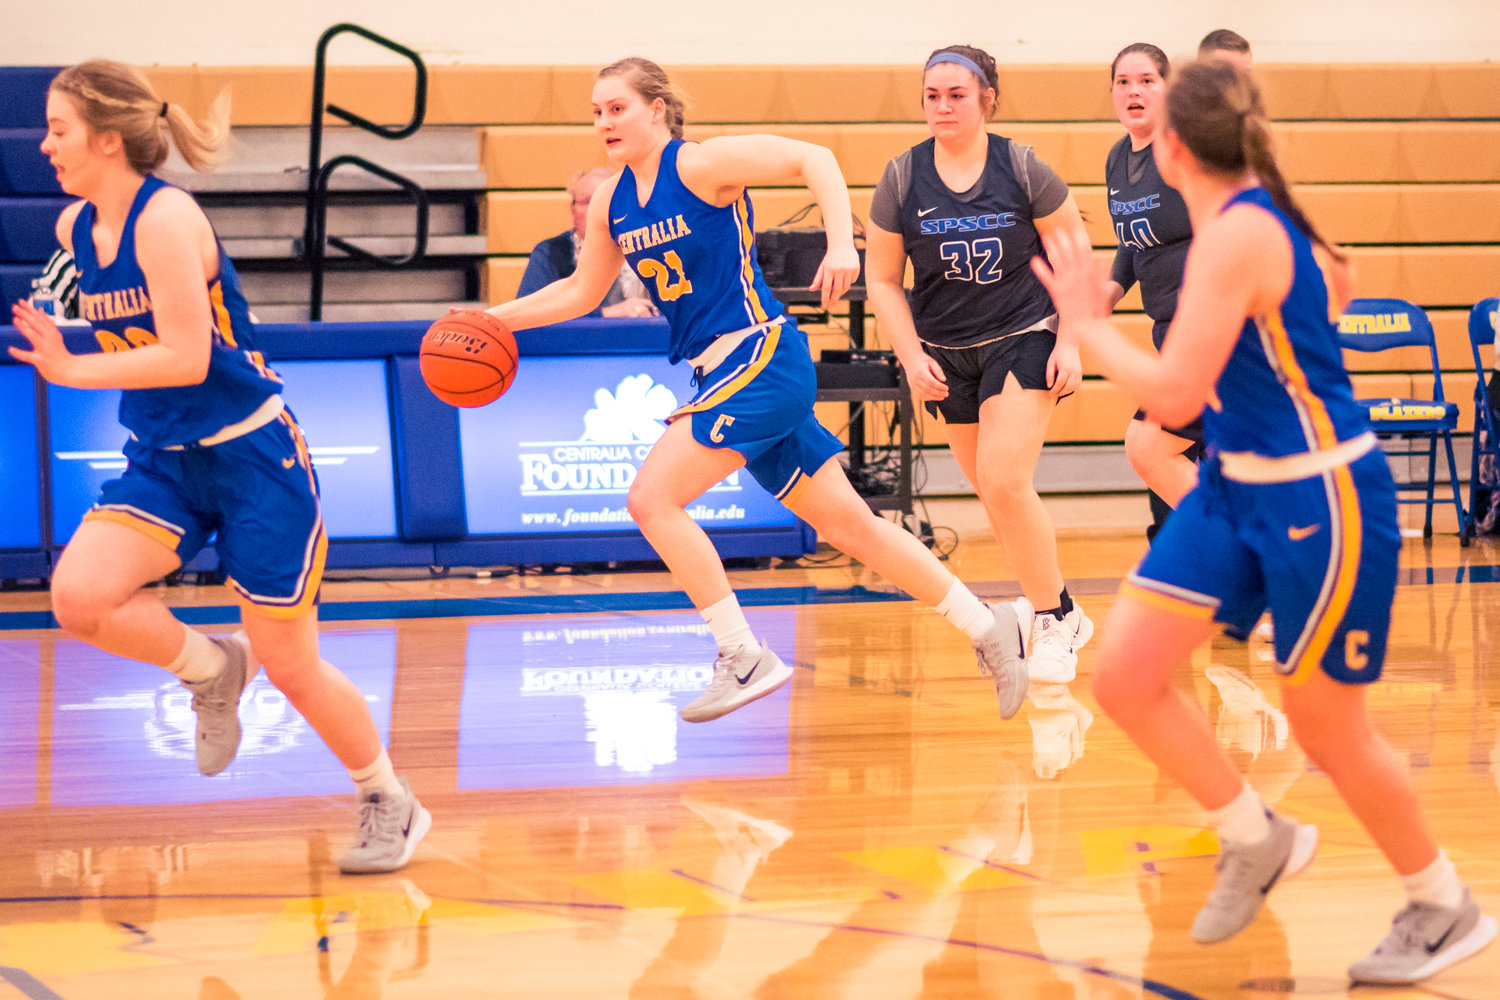 Centralia's Rachel Wilkerson (21) takes the ball down court during a women's basketball game against S.P.S.C.C Wednesday night at Centralia College.